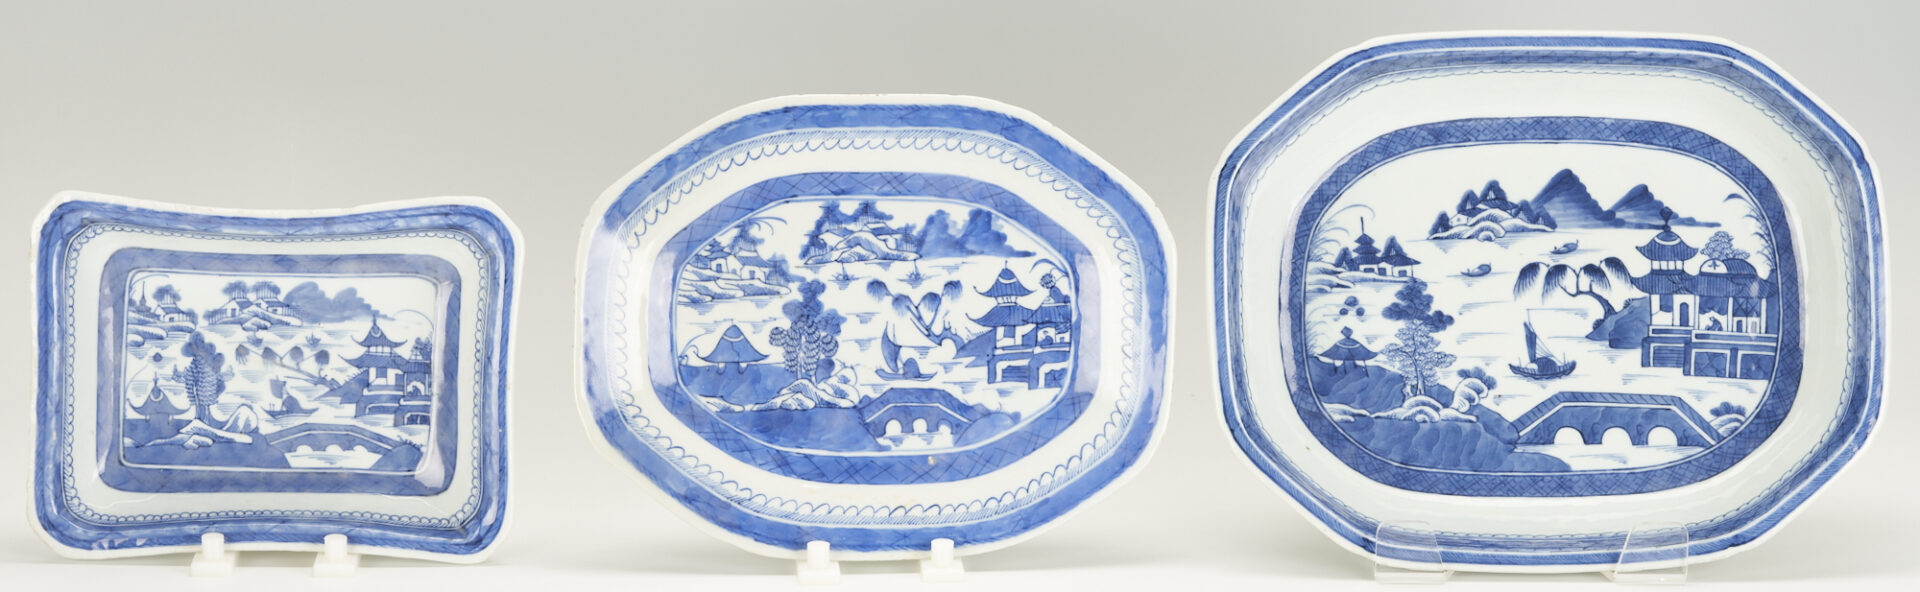 Lot 245: 10 Assorted Chinese Export Canton Porcelain Dinnerware Items, incl. Tureens